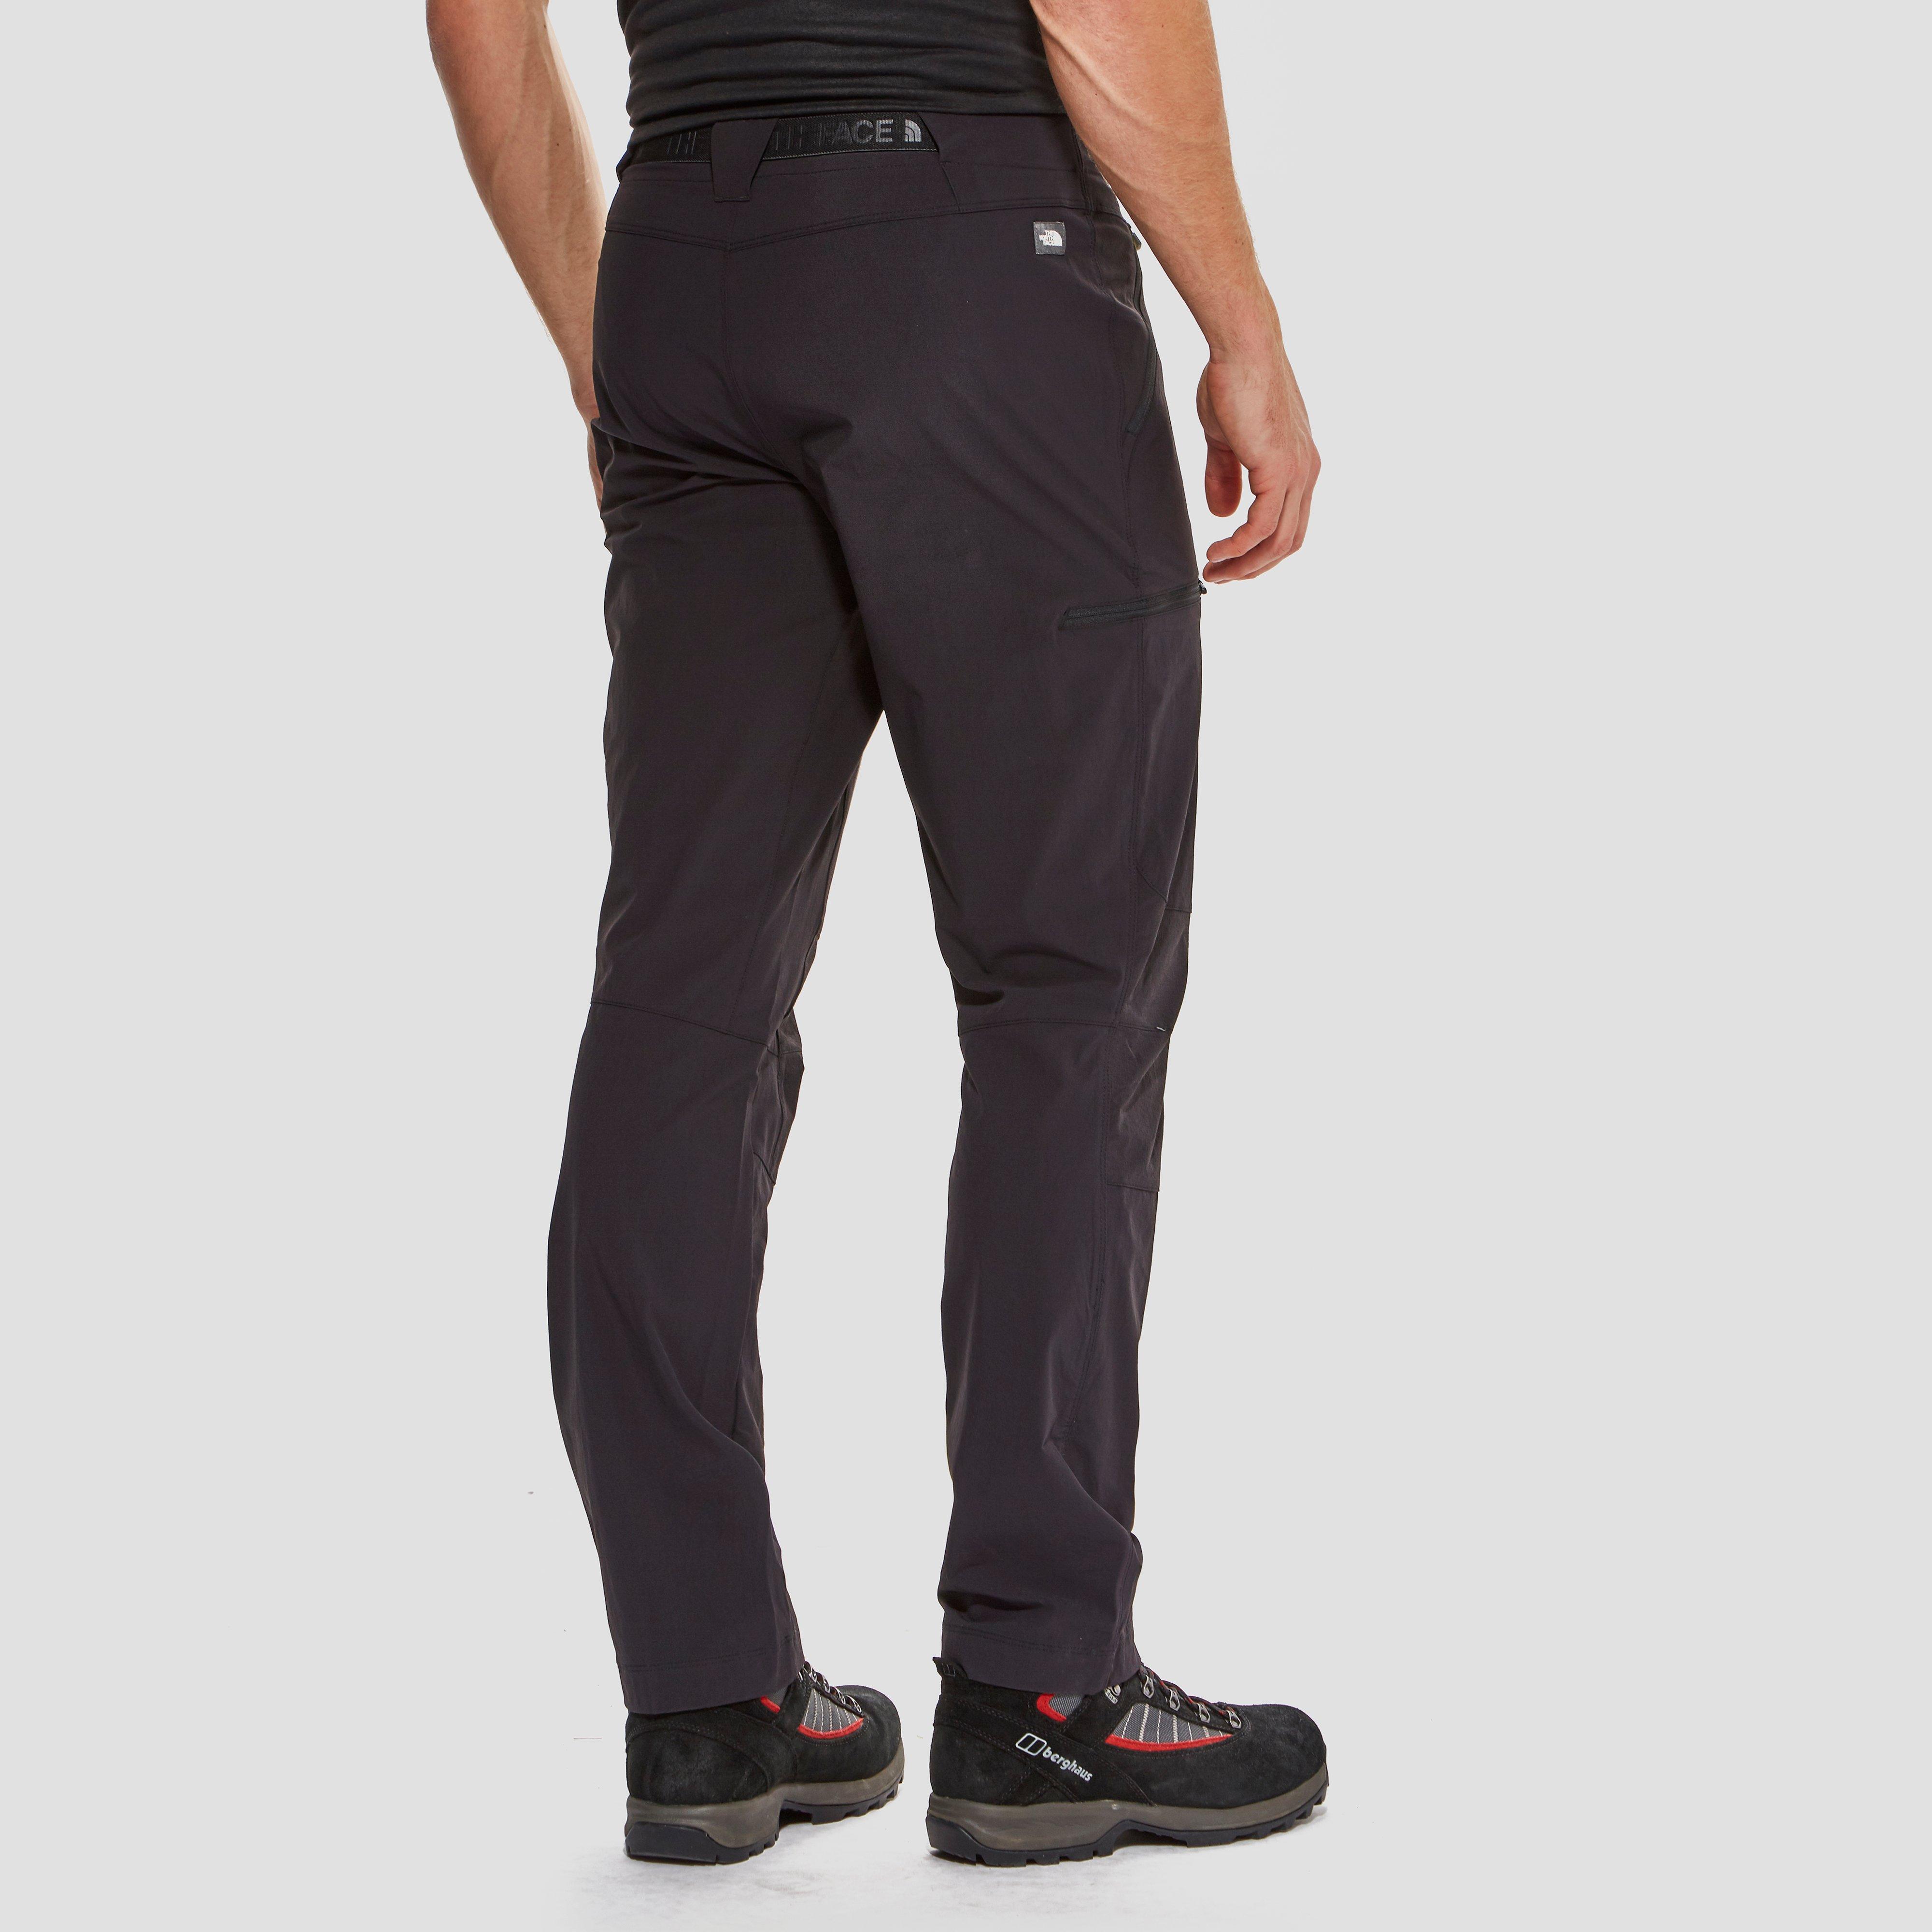 north face speedlight pants review